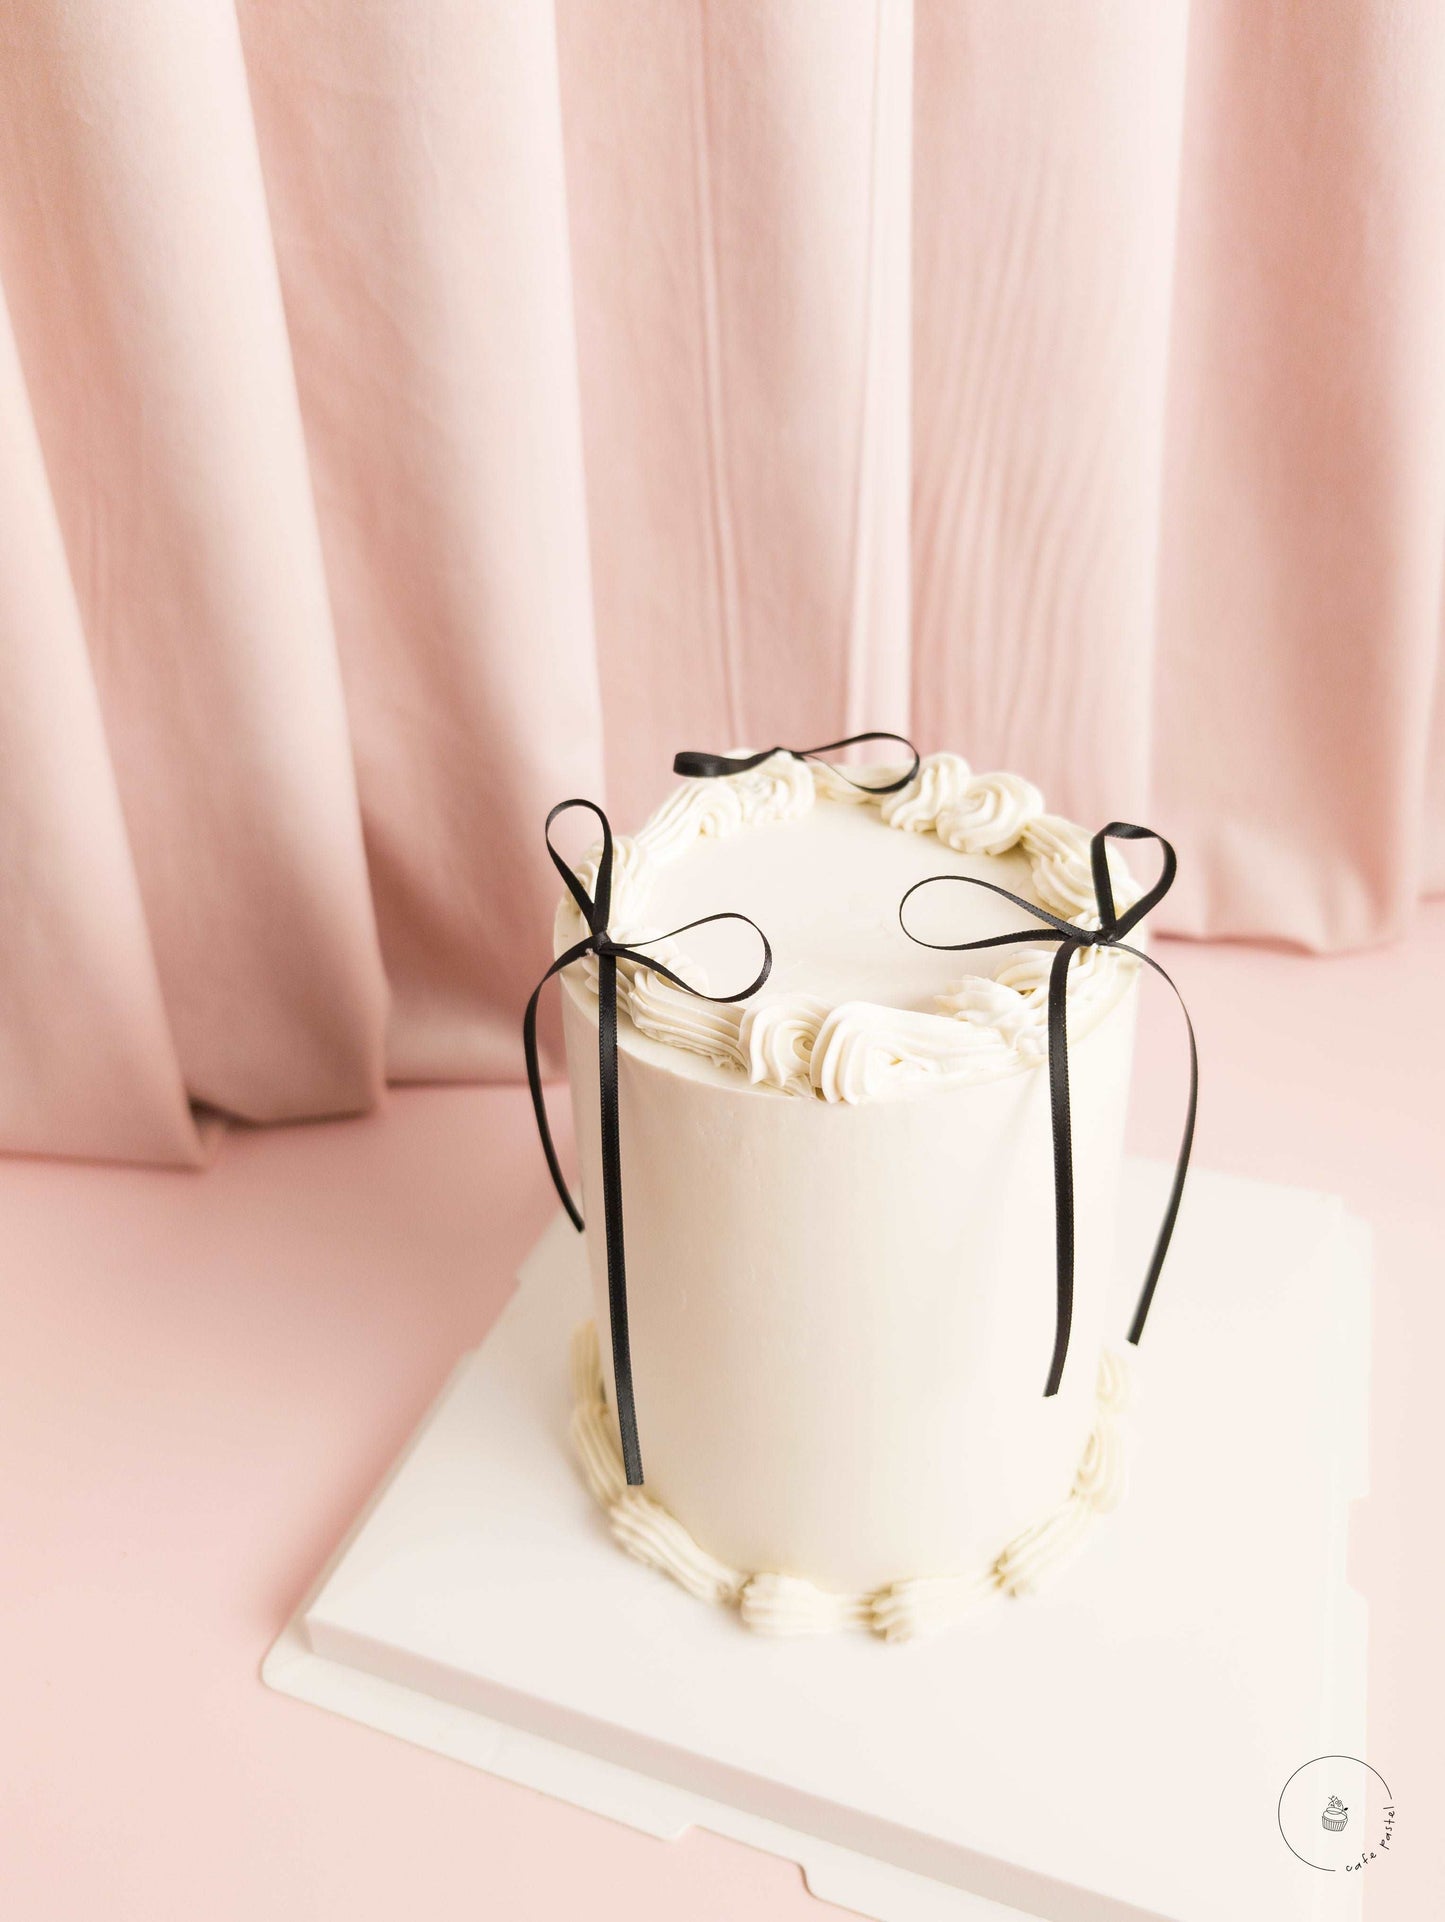 High ivory cake with three black ribbons and cream ruffles on top of it.